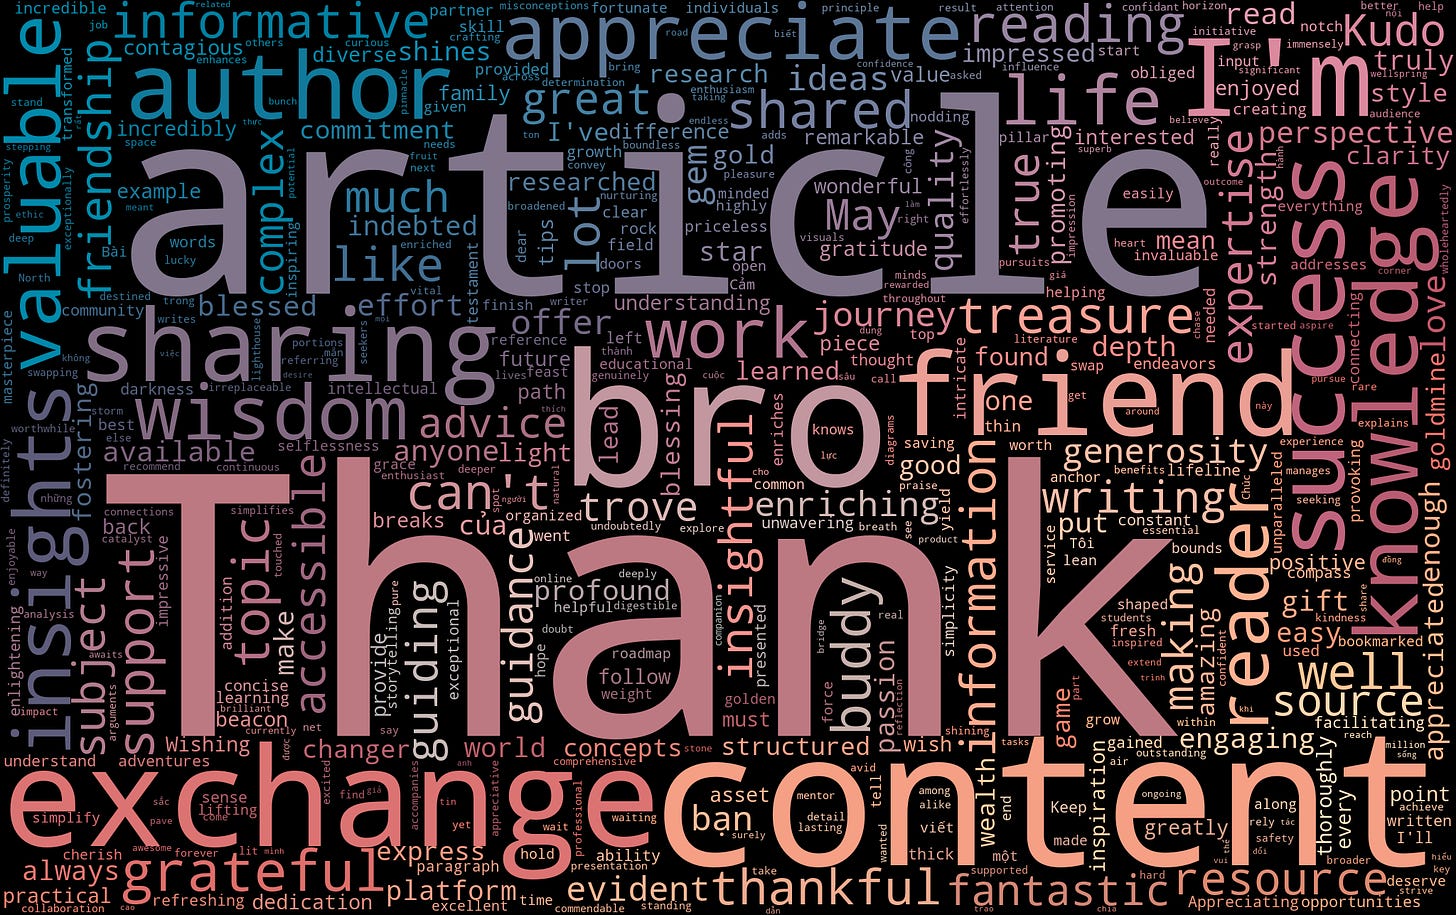 wordcloud of words most frequently used by the network, prominently including "thank", "article", "bro", "exchange", and "content"